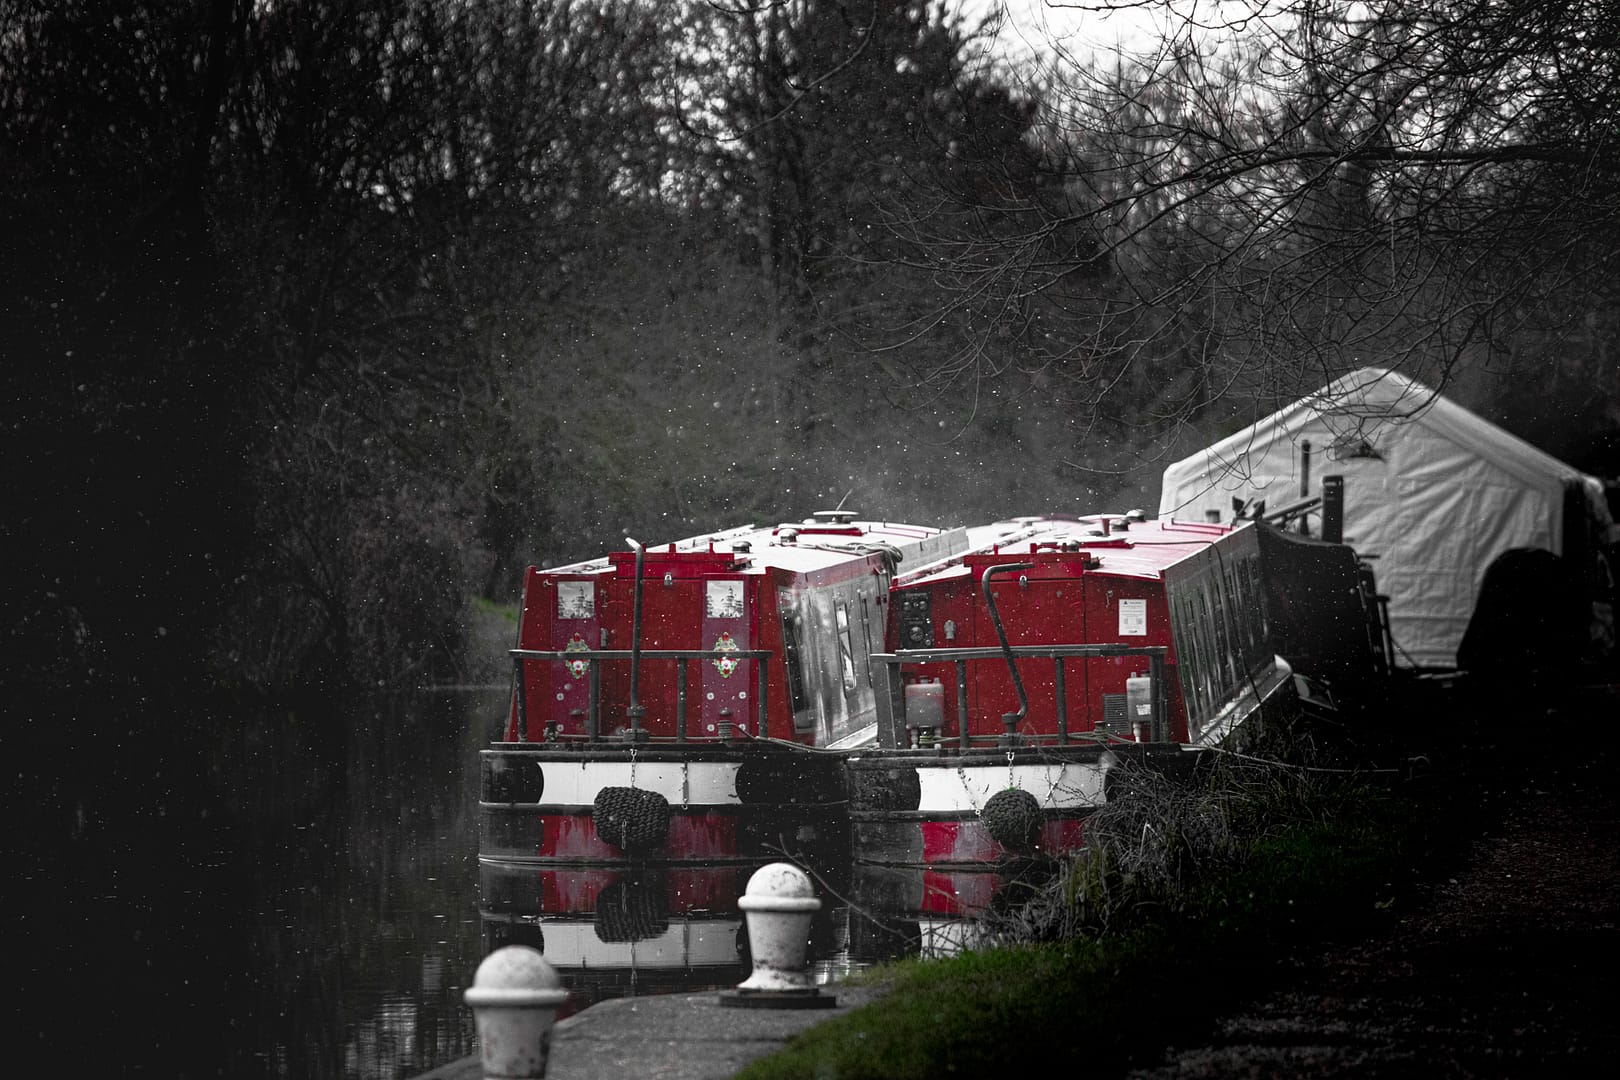 Aldermaston Wharf Winter and 2 Red Narrow boats sit silently as the snow just begins to fall.